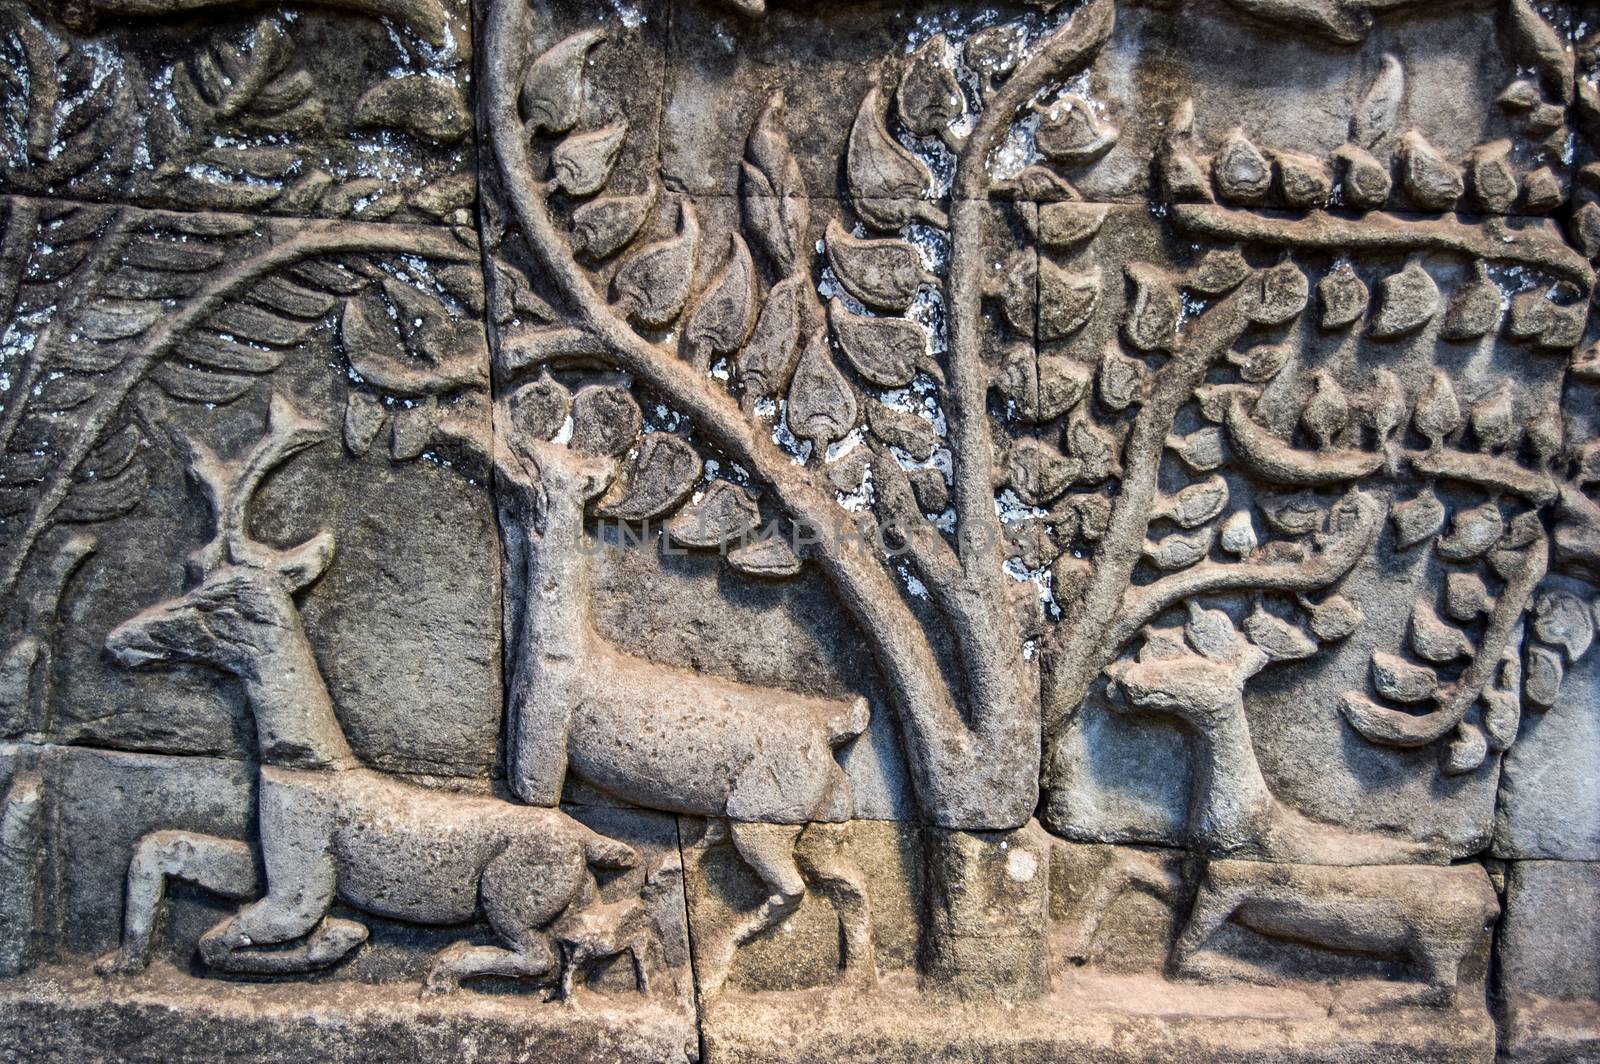 Ancient bas relief carving showing deer in a forest. Wall of Bayon Temple, Angkor Thom, Siem Reap, Cambodia.